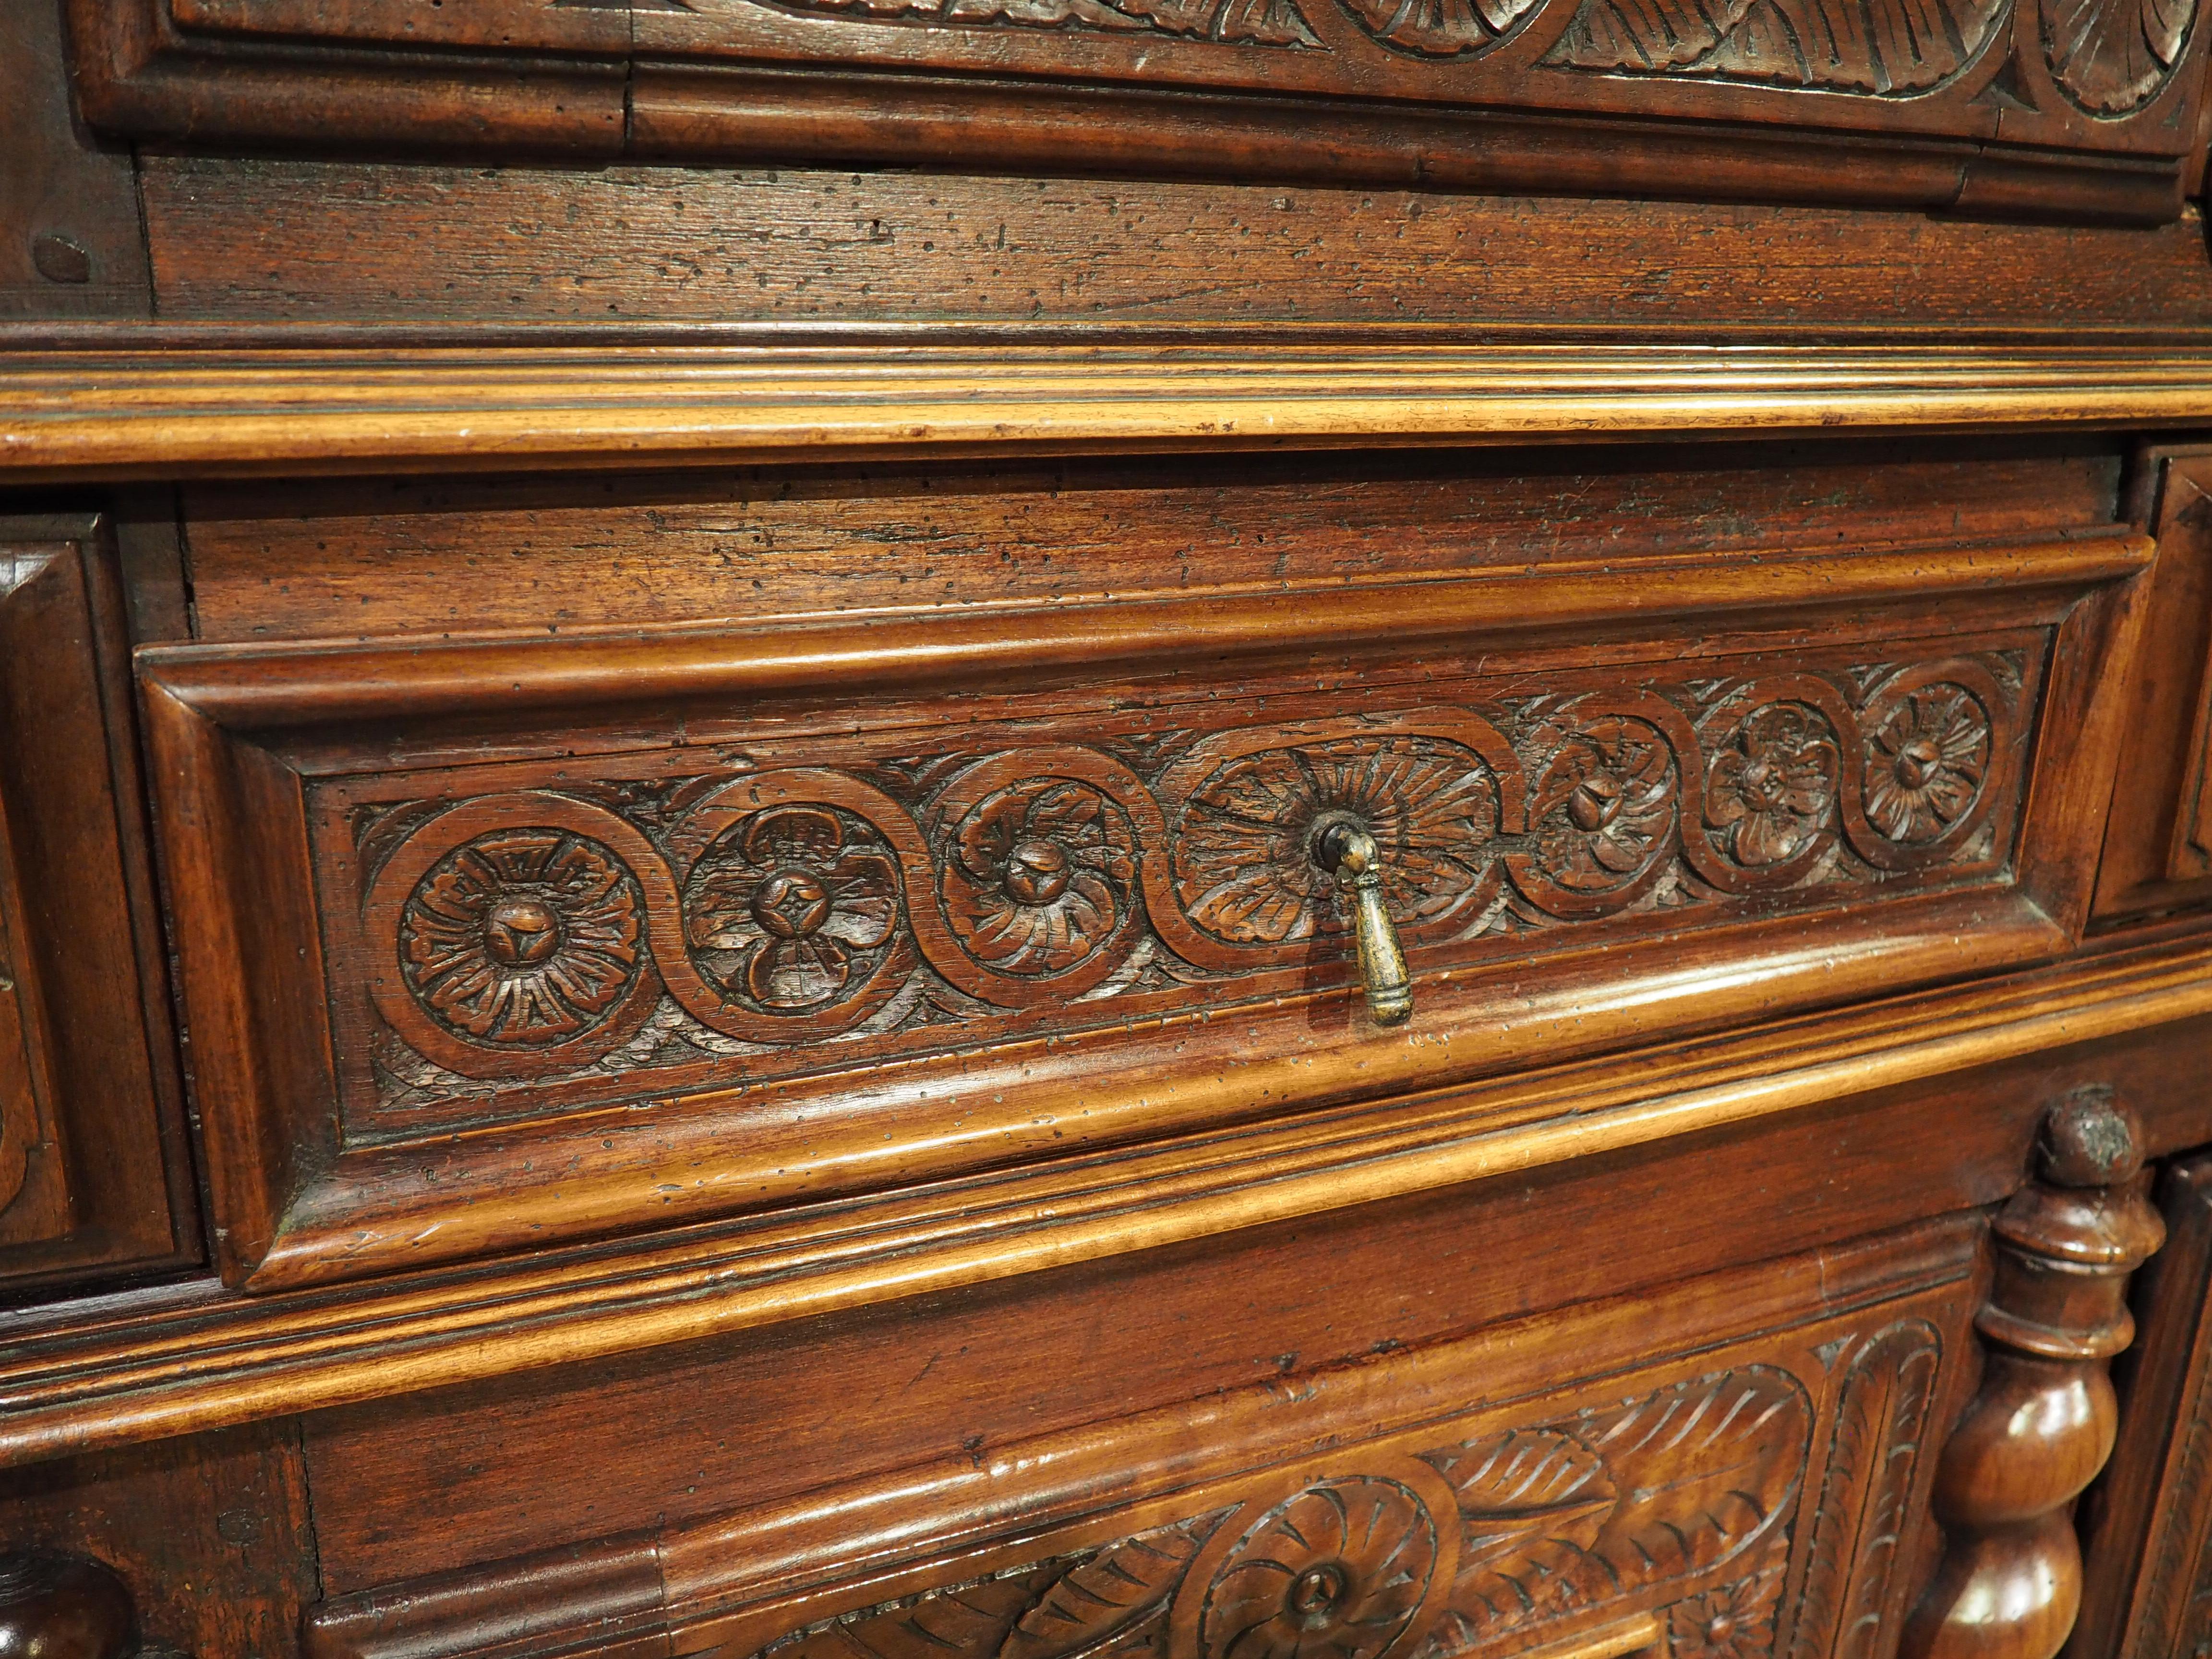 Hand-carved from walnut wood and embellished with gilt highlights, this stunning four door buffet deux corps was produced around Lyon, France, during the mid to late 1600’s. The two-bodied storage piece, which has large bun feet in the front, can be